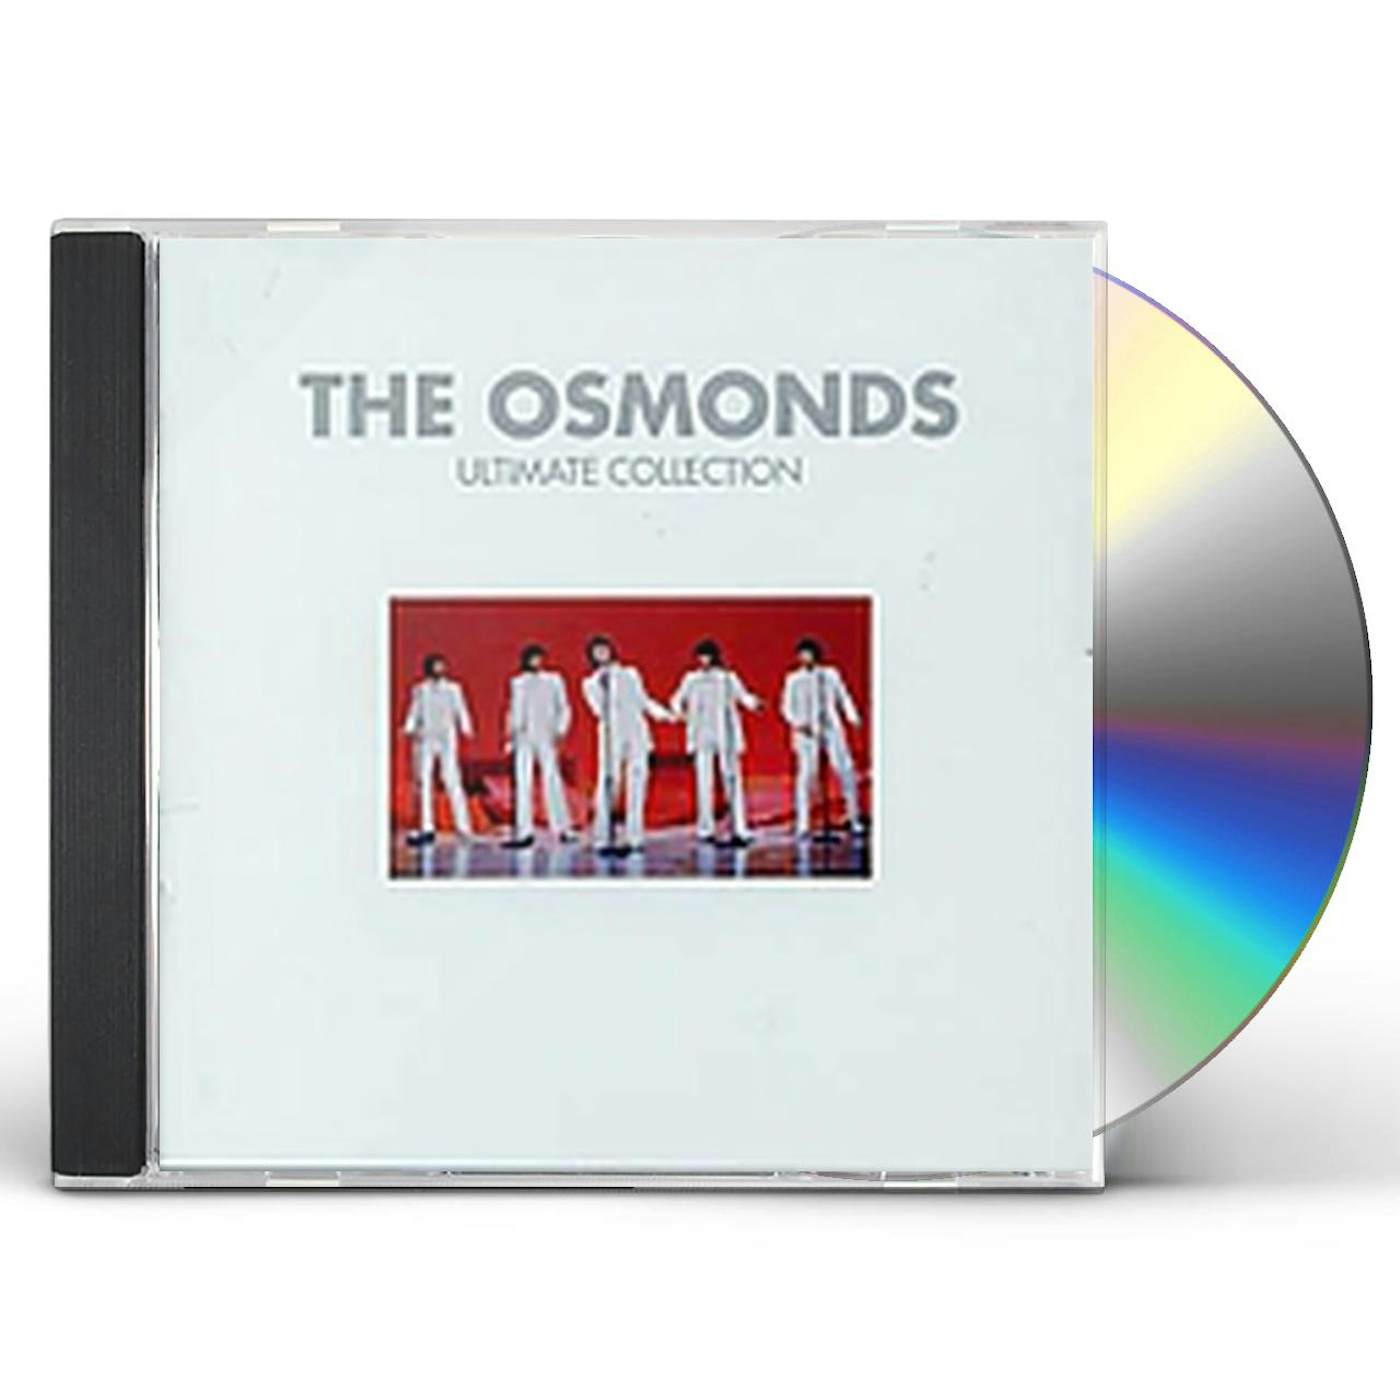 The Osmonds ULTIMATE COLLECTION CD